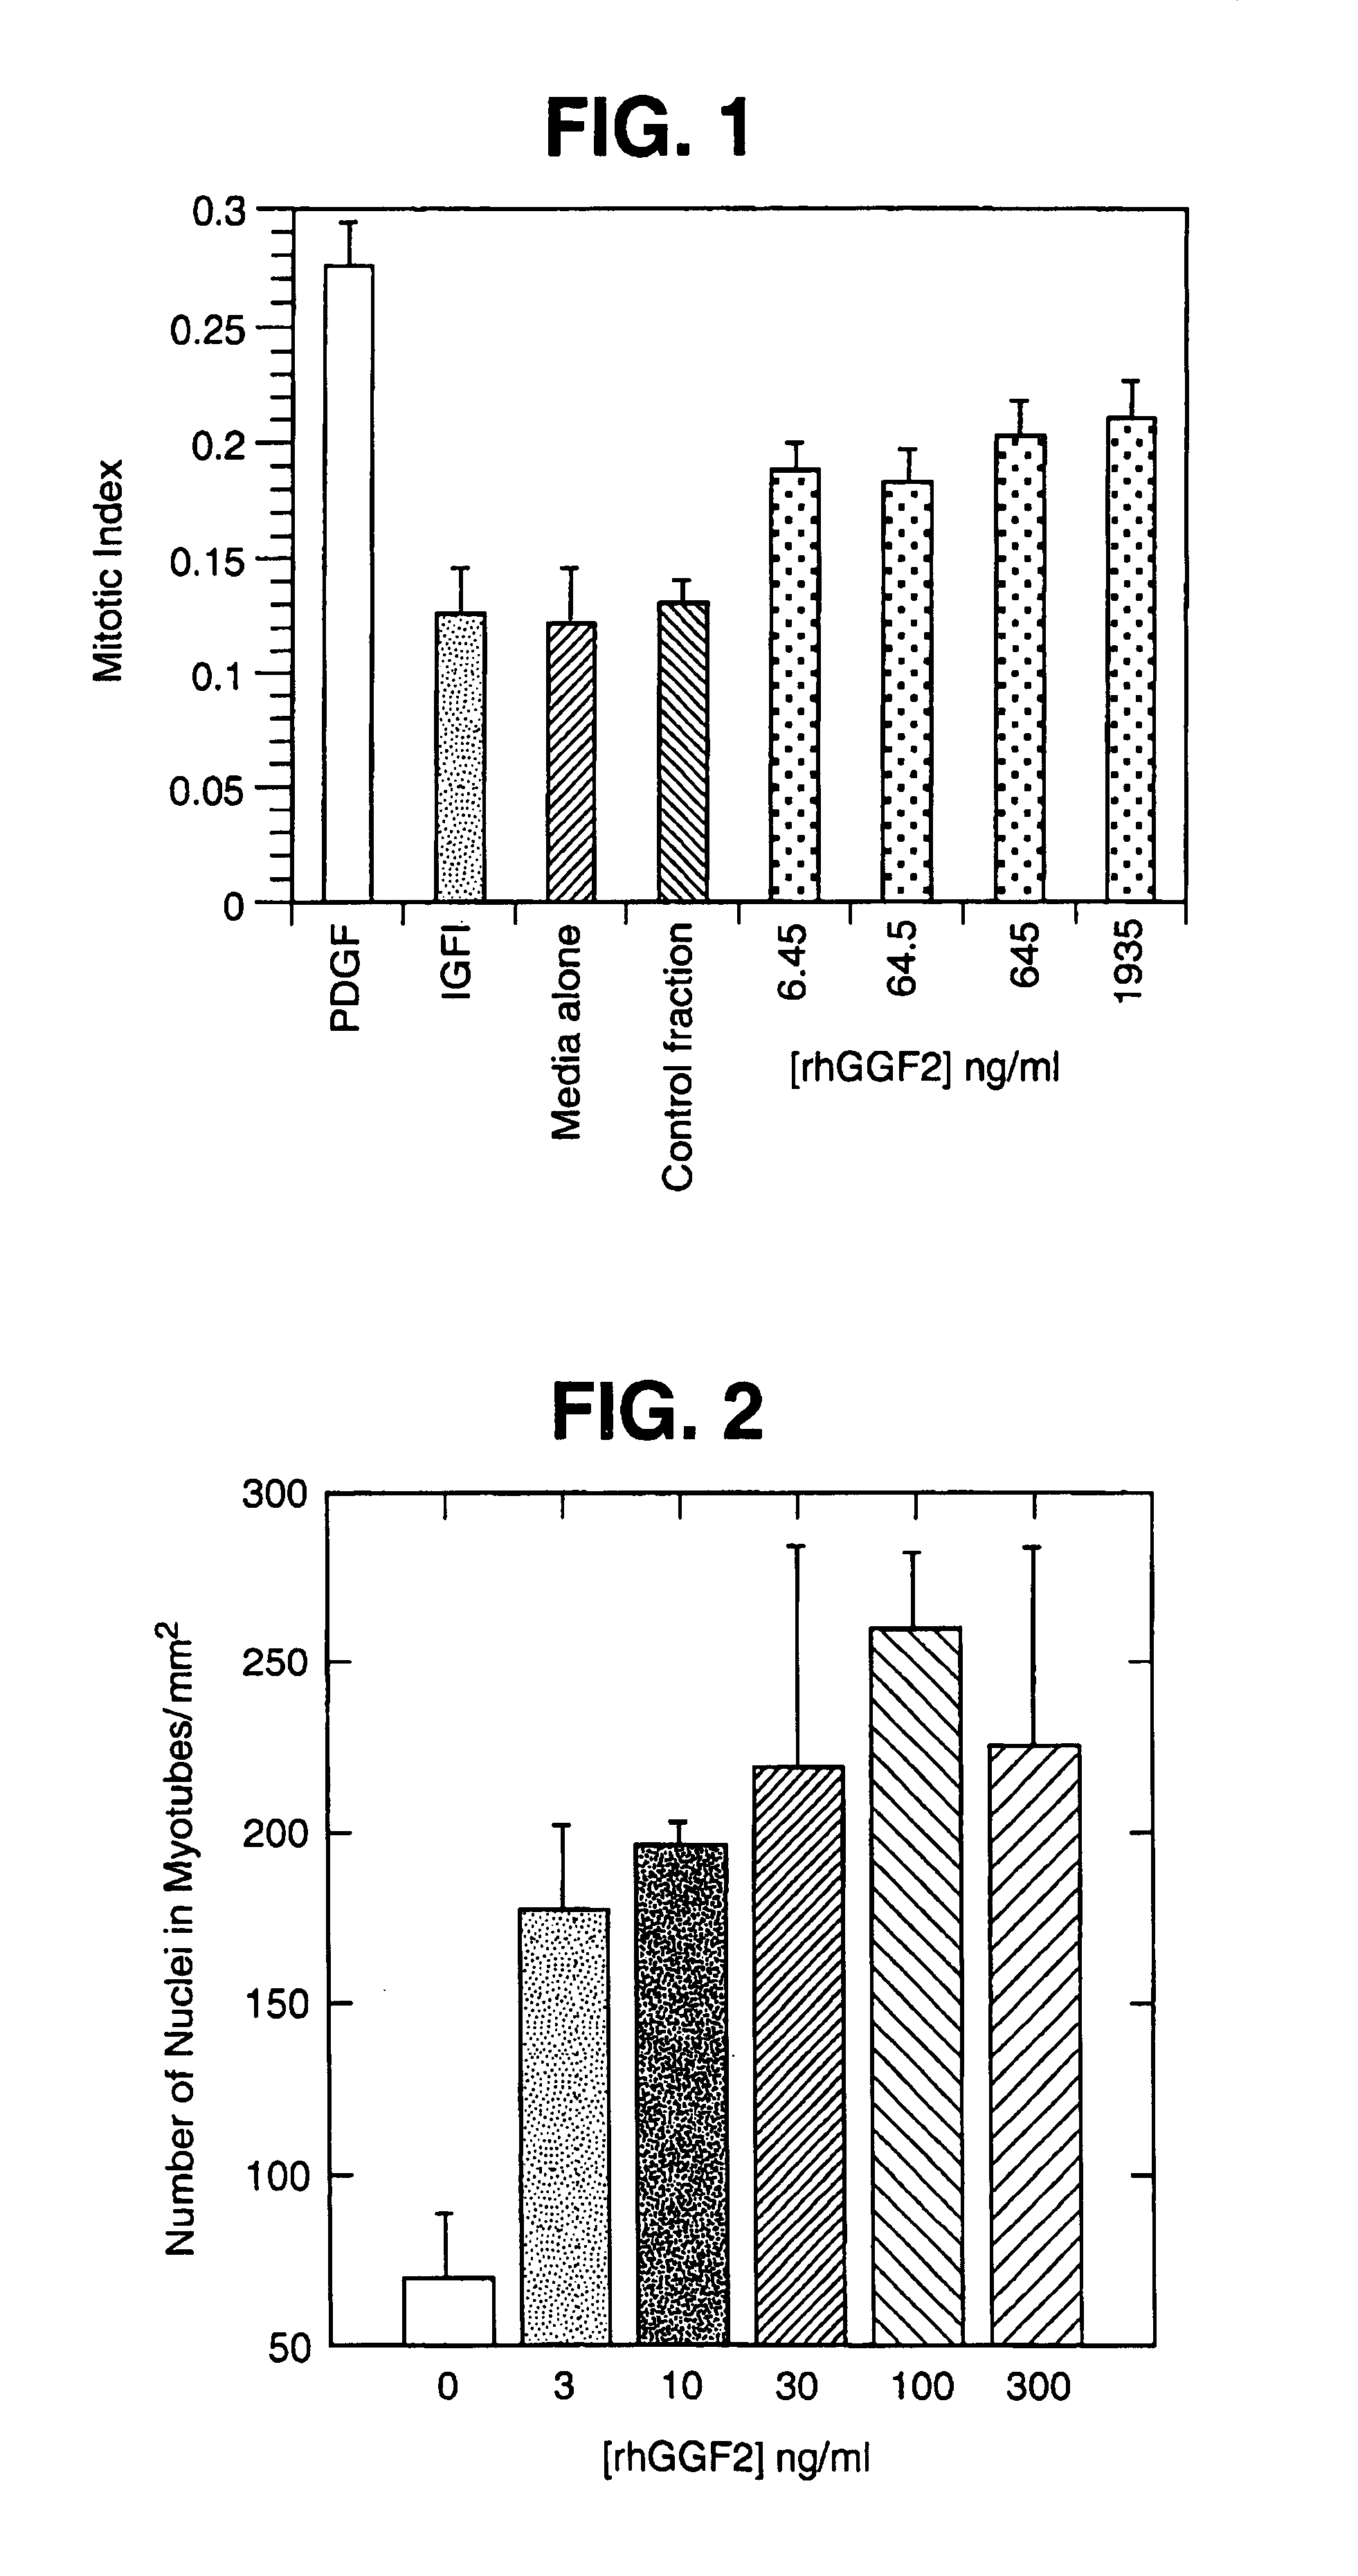 Methods of increasing myotube formation or survival or muscle cell mitogenesis differentiation or survival using neuregulin GGF III